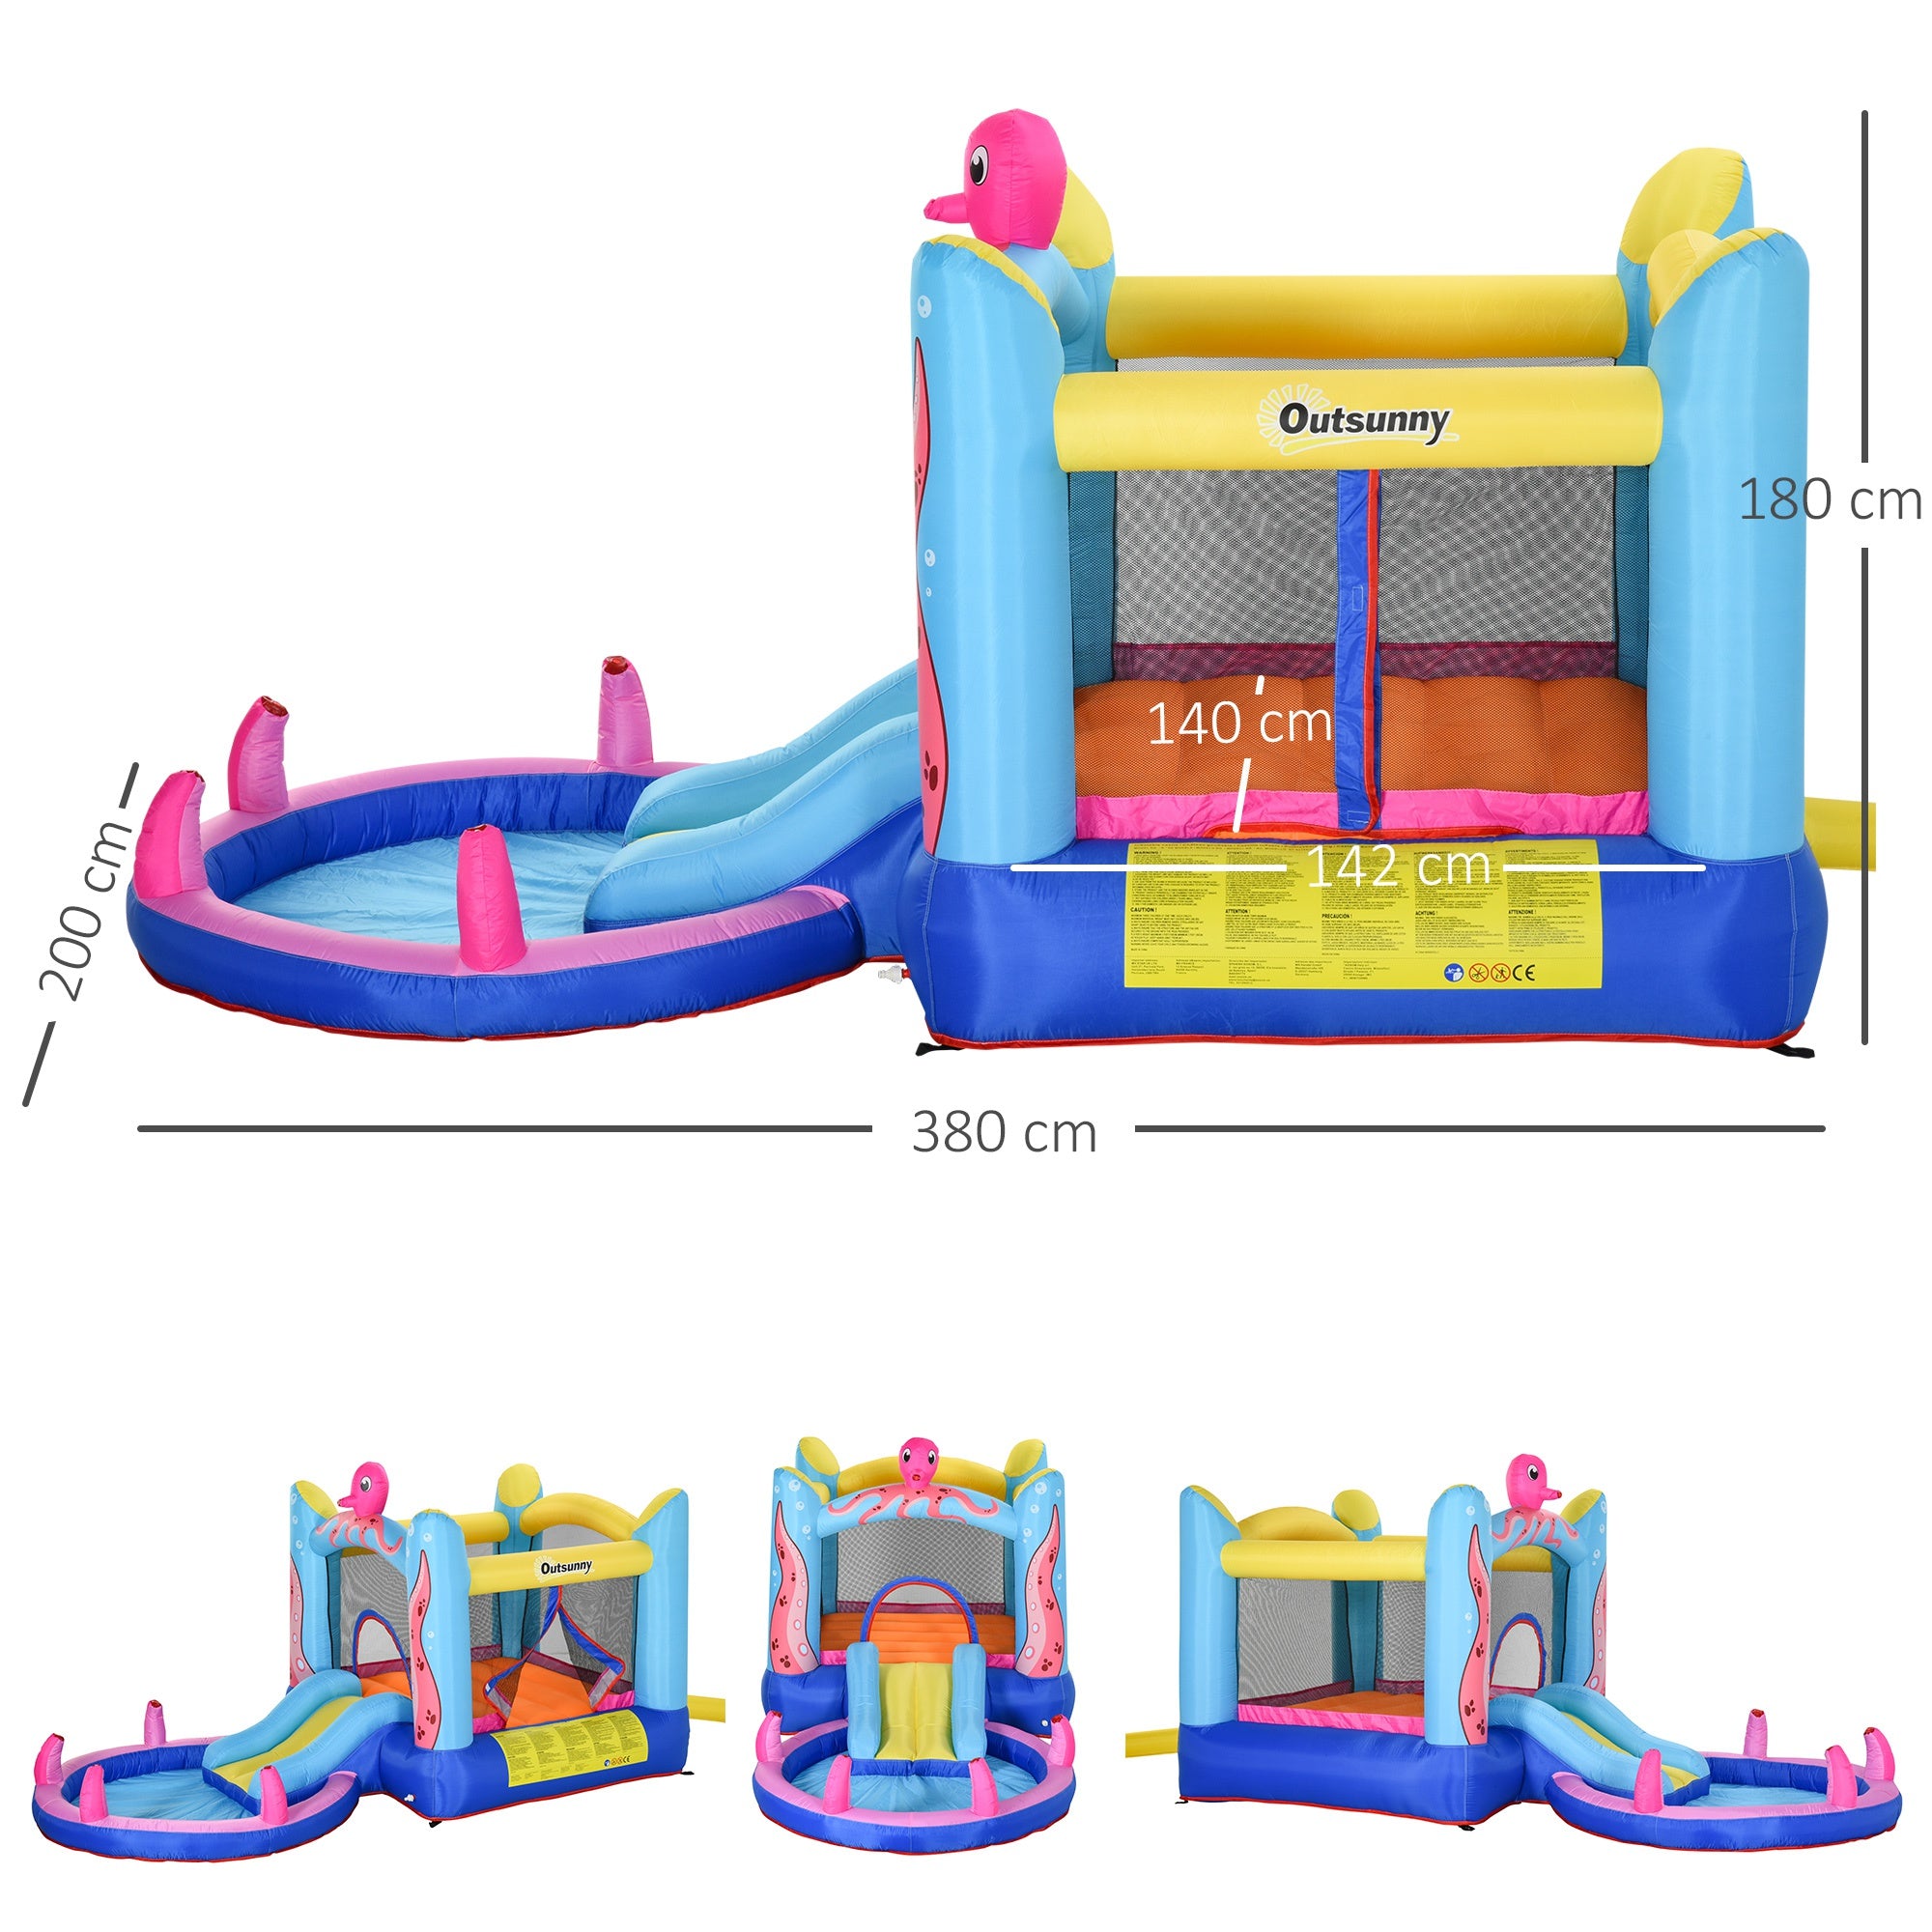 Outsunny Kids Bounce Castle House Inflatable Trampoline Slide Water Pool 3 in 1 with Inflator for Kids Age 3-12 Octopus Design 3.8 x 2 x 1.8m - Inspirely